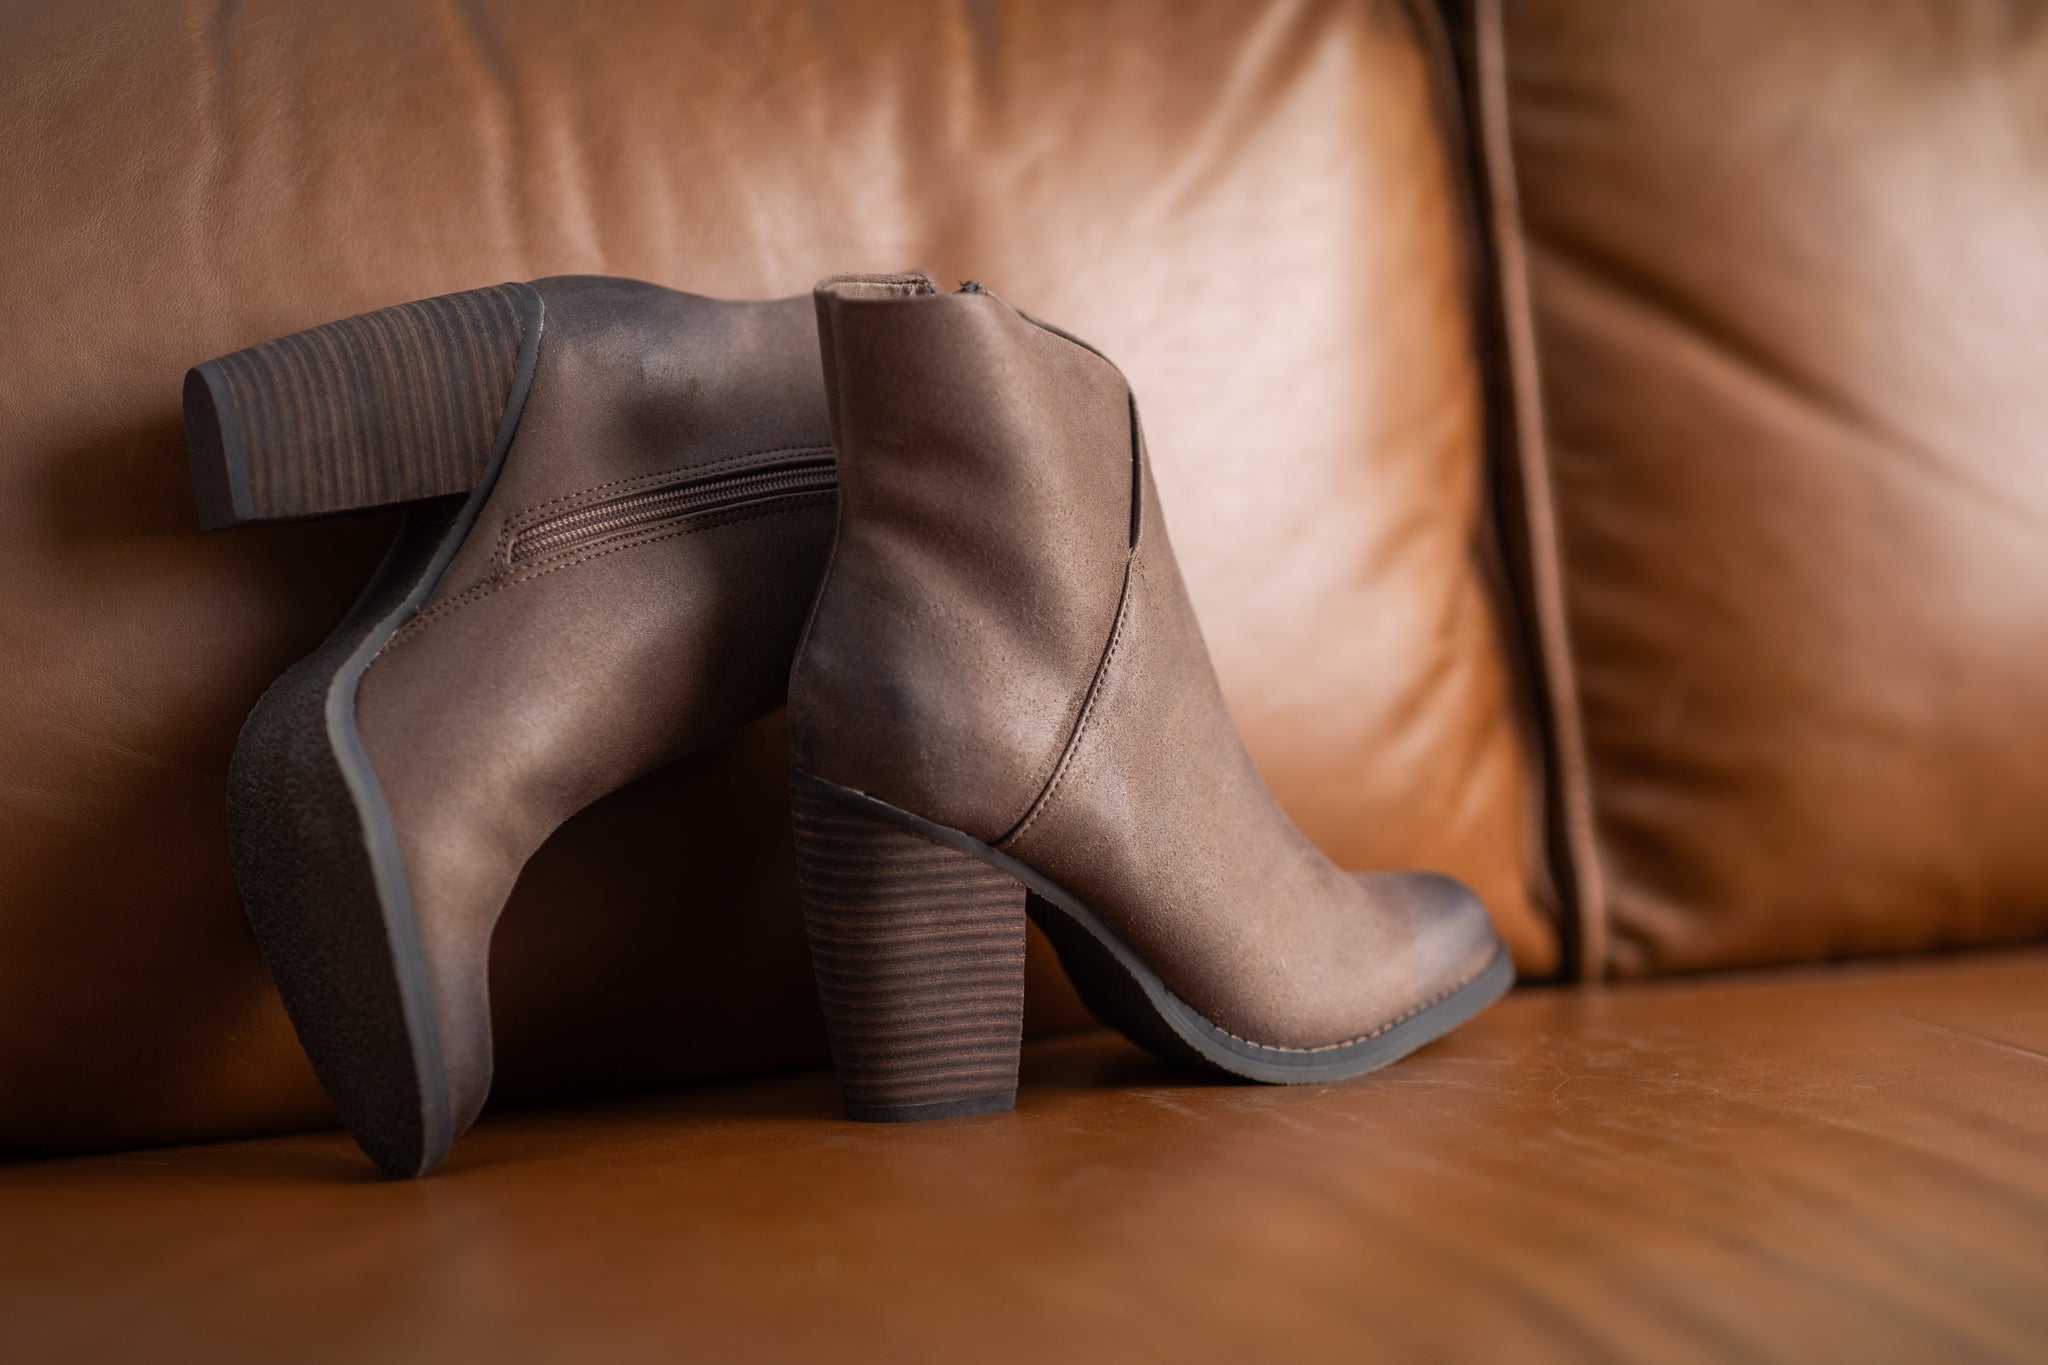 Bennington Asymmetrical Fold Over Ankle Boot in Taupe